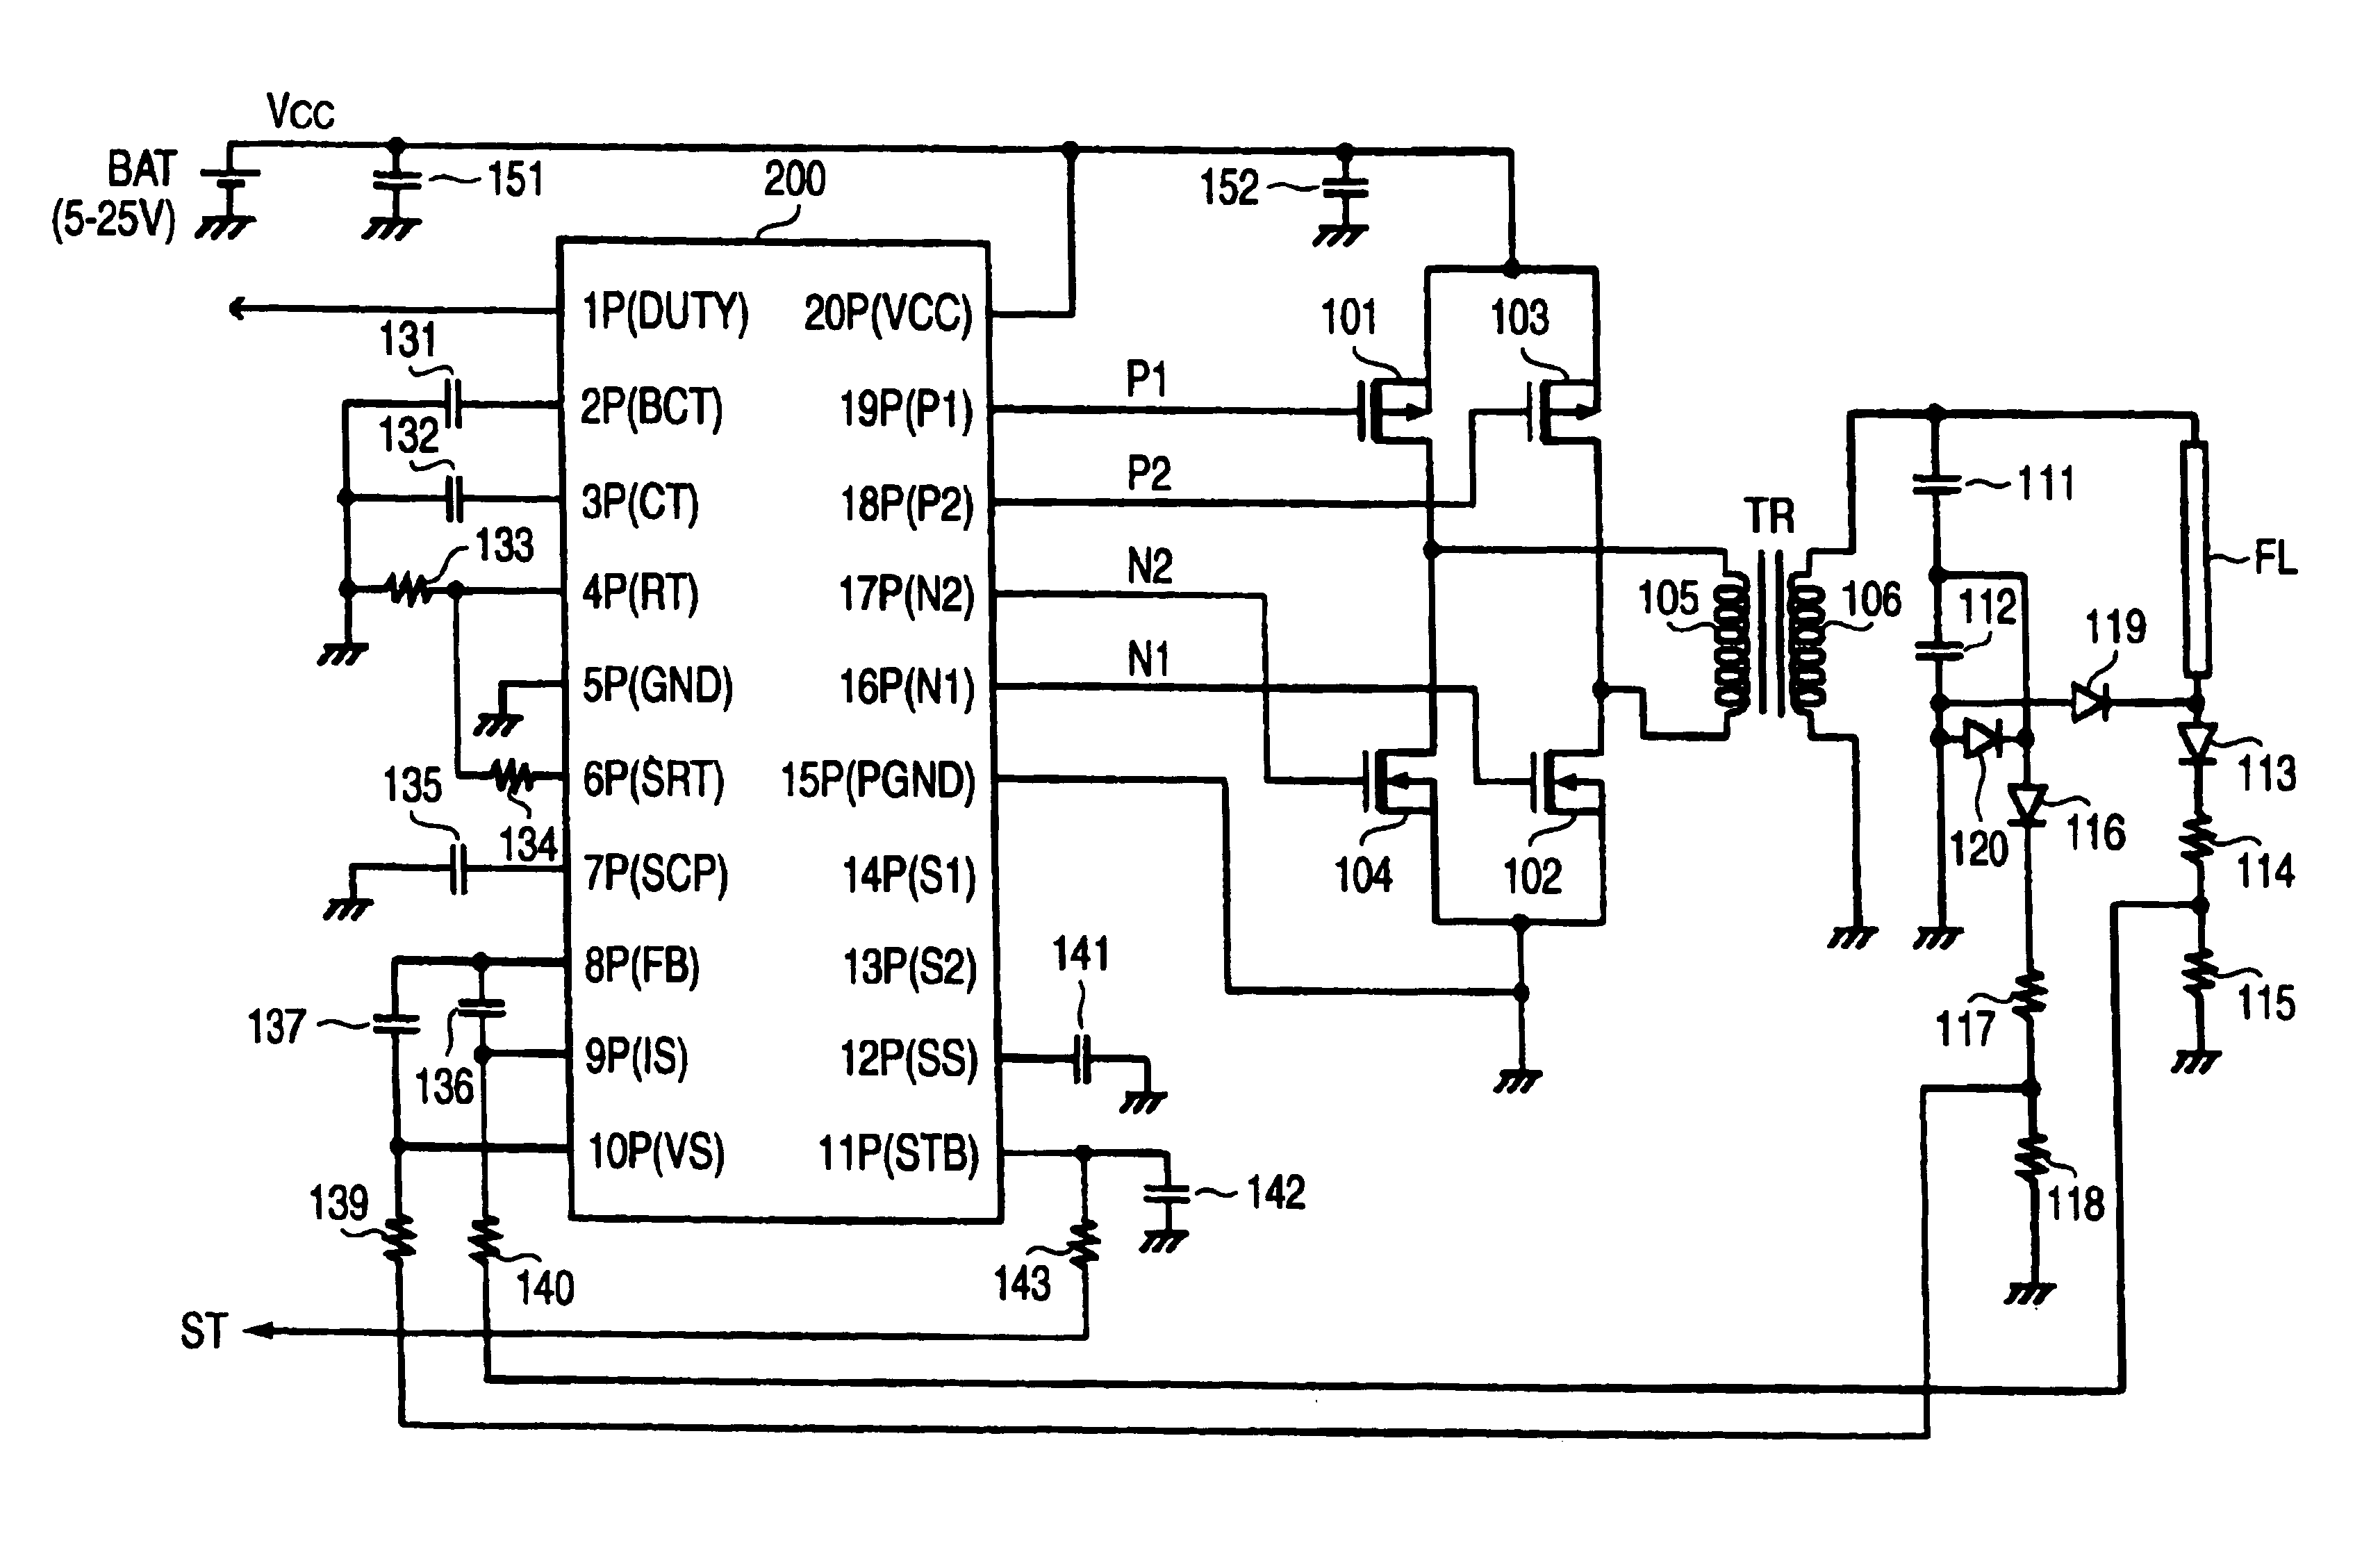 DC-AC converter and controller IC for the same